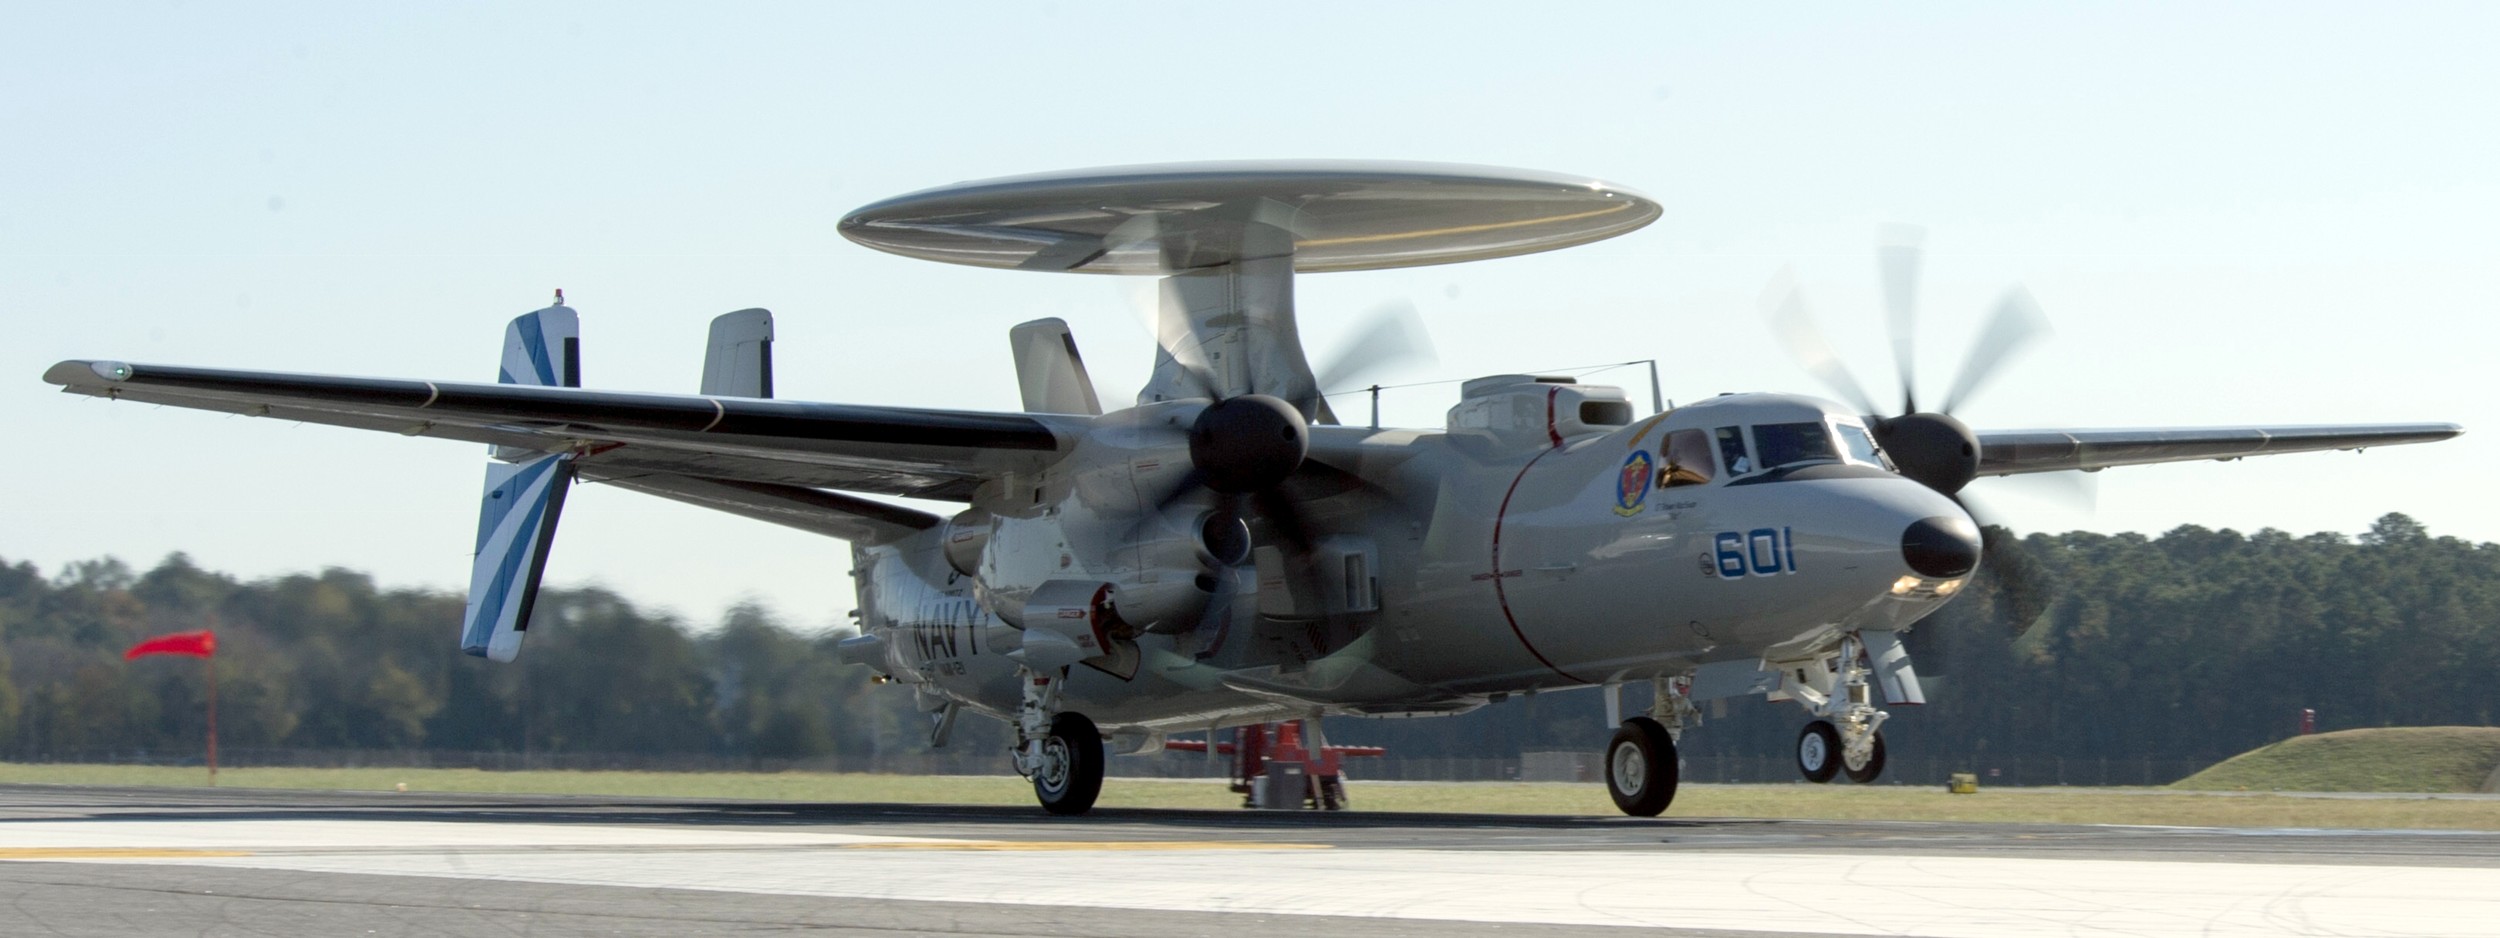 vaw-121 bluetails carrier airborne early warning squadron us navy e-2d advanced hawkeye nas norfolk 38